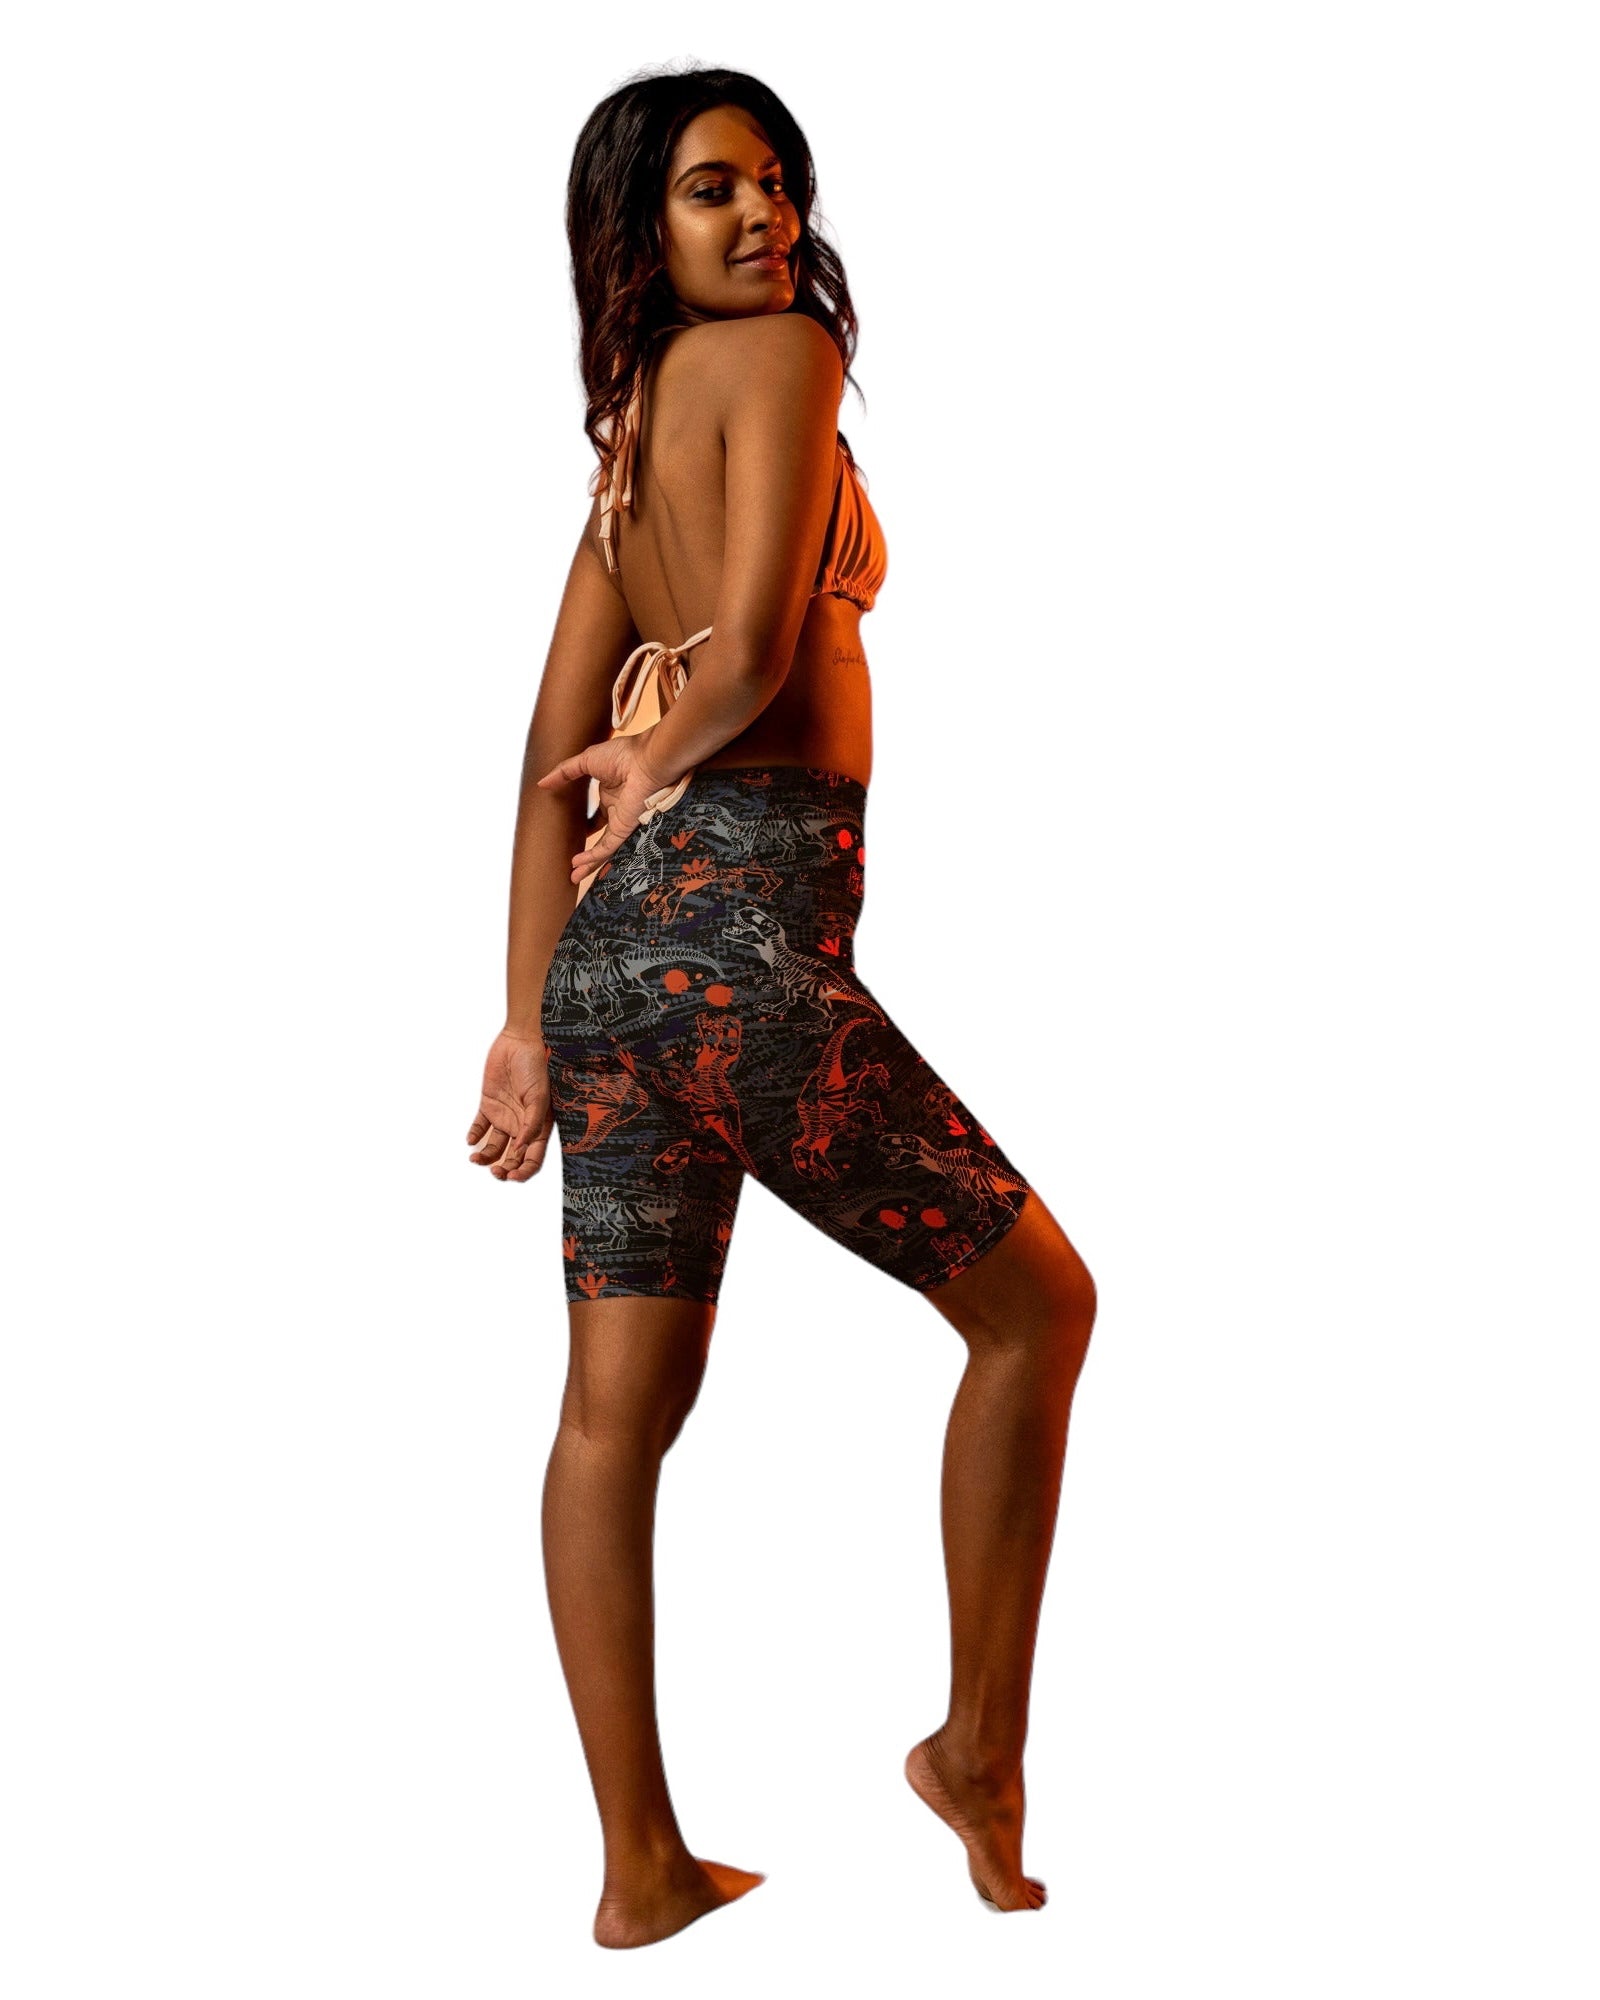 Model sporting One Stop Rave's T-Wrecked Biker Shorts with a vibrant dinosaur print.